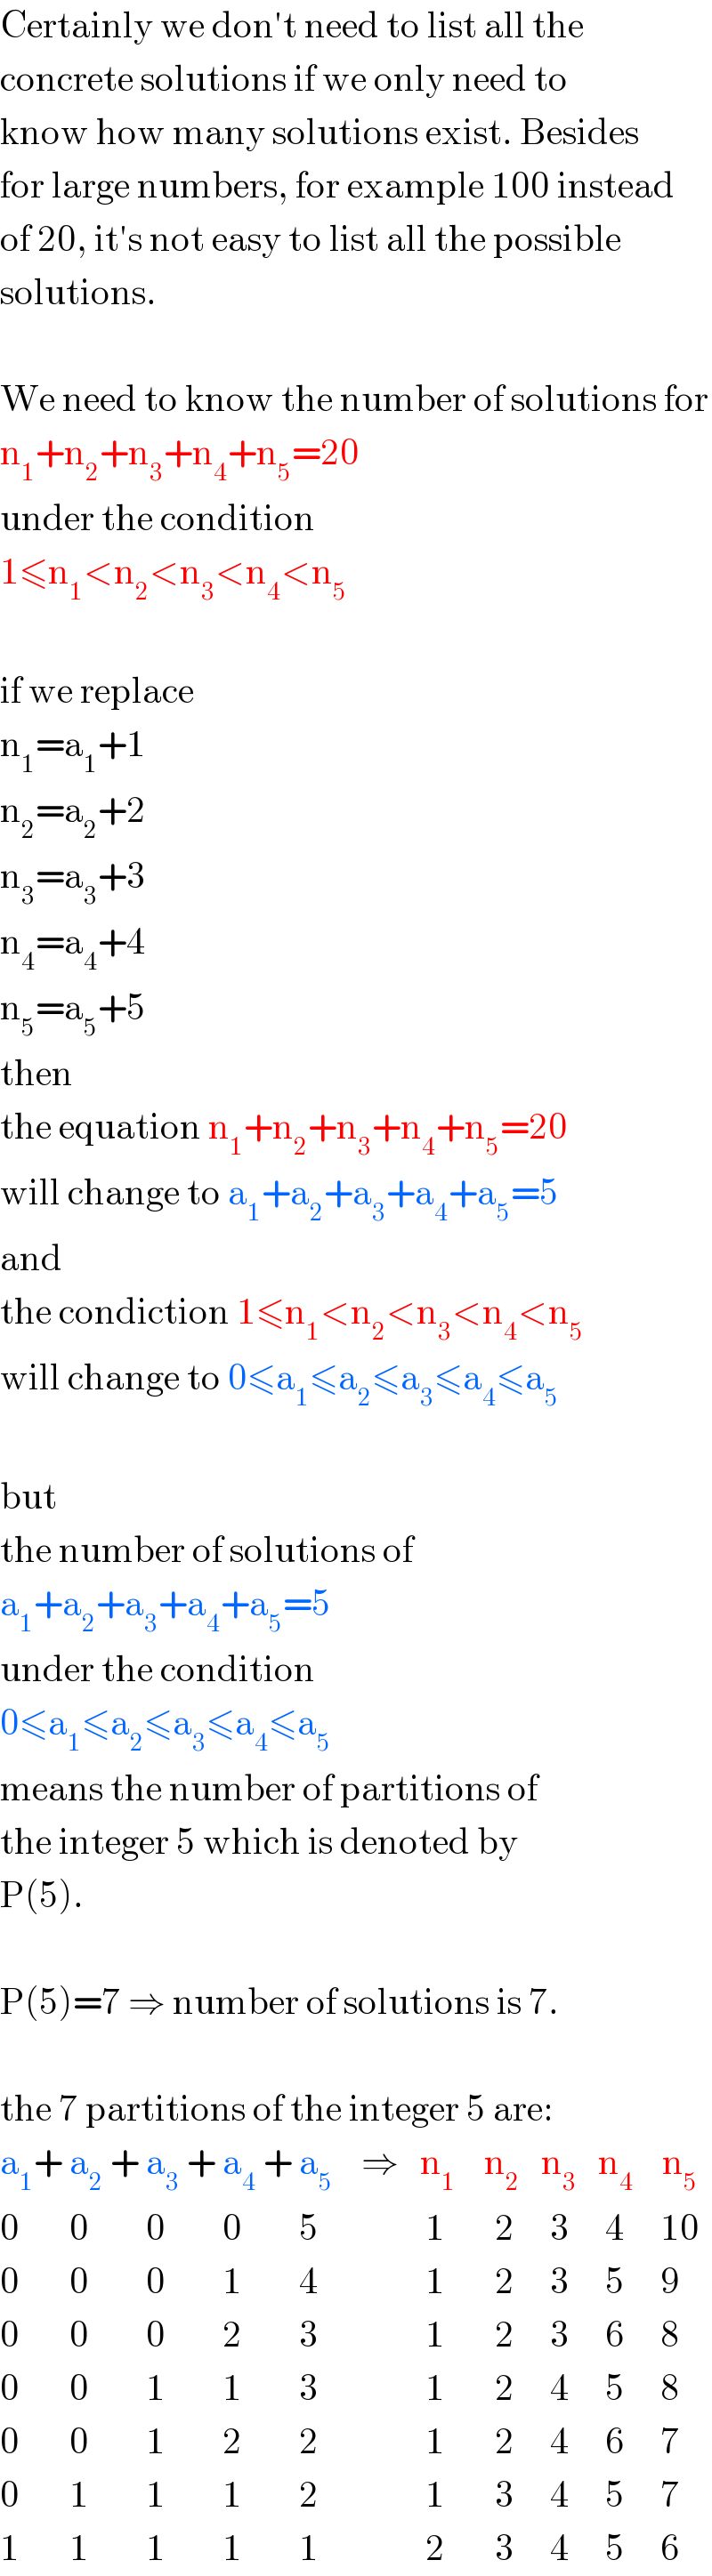 Certainly we don′t need to list all the  concrete solutions if we only need to  know how many solutions exist. Besides  for large numbers, for example 100 instead  of 20, it′s not easy to list all the possible  solutions.    We need to know the number of solutions for  n_1 +n_2 +n_3 +n_4 +n_5 =20  under the condition  1≤n_1 <n_2 <n_3 <n_4 <n_5     if we replace  n_1 =a_1 +1  n_2 =a_2 +2  n_3 =a_3 +3  n_4 =a_4 +4  n_5 =a_5 +5  then  the equation n_1 +n_2 +n_3 +n_4 +n_5 =20  will change to a_1 +a_2 +a_3 +a_4 +a_5 =5  and  the condiction 1≤n_1 <n_2 <n_3 <n_4 <n_5   will change to 0≤a_1 ≤a_2 ≤a_3 ≤a_4 ≤a_5     but  the number of solutions of  a_1 +a_2 +a_3 +a_4 +a_5 =5  under the condition  0≤a_1 ≤a_2 ≤a_3 ≤a_4 ≤a_5   means the number of partitions of  the integer 5 which is denoted by  P(5).    P(5)=7 ⇒ number of solutions is 7.    the 7 partitions of the integer 5 are:  a_1 + a_2  + a_3  + a_4  + a_5     ⇒   n_1     n_2    n_3    n_4     n_5   0       0        0        0        5               1       2     3     4     10  0       0        0        1        4               1       2     3     5     9  0       0        0        2        3               1       2     3     6     8  0       0        1        1        3               1       2     4     5     8  0       0        1        2        2               1       2     4     6     7  0       1        1        1        2               1       3     4     5     7  1       1        1        1        1               2       3     4     5     6  